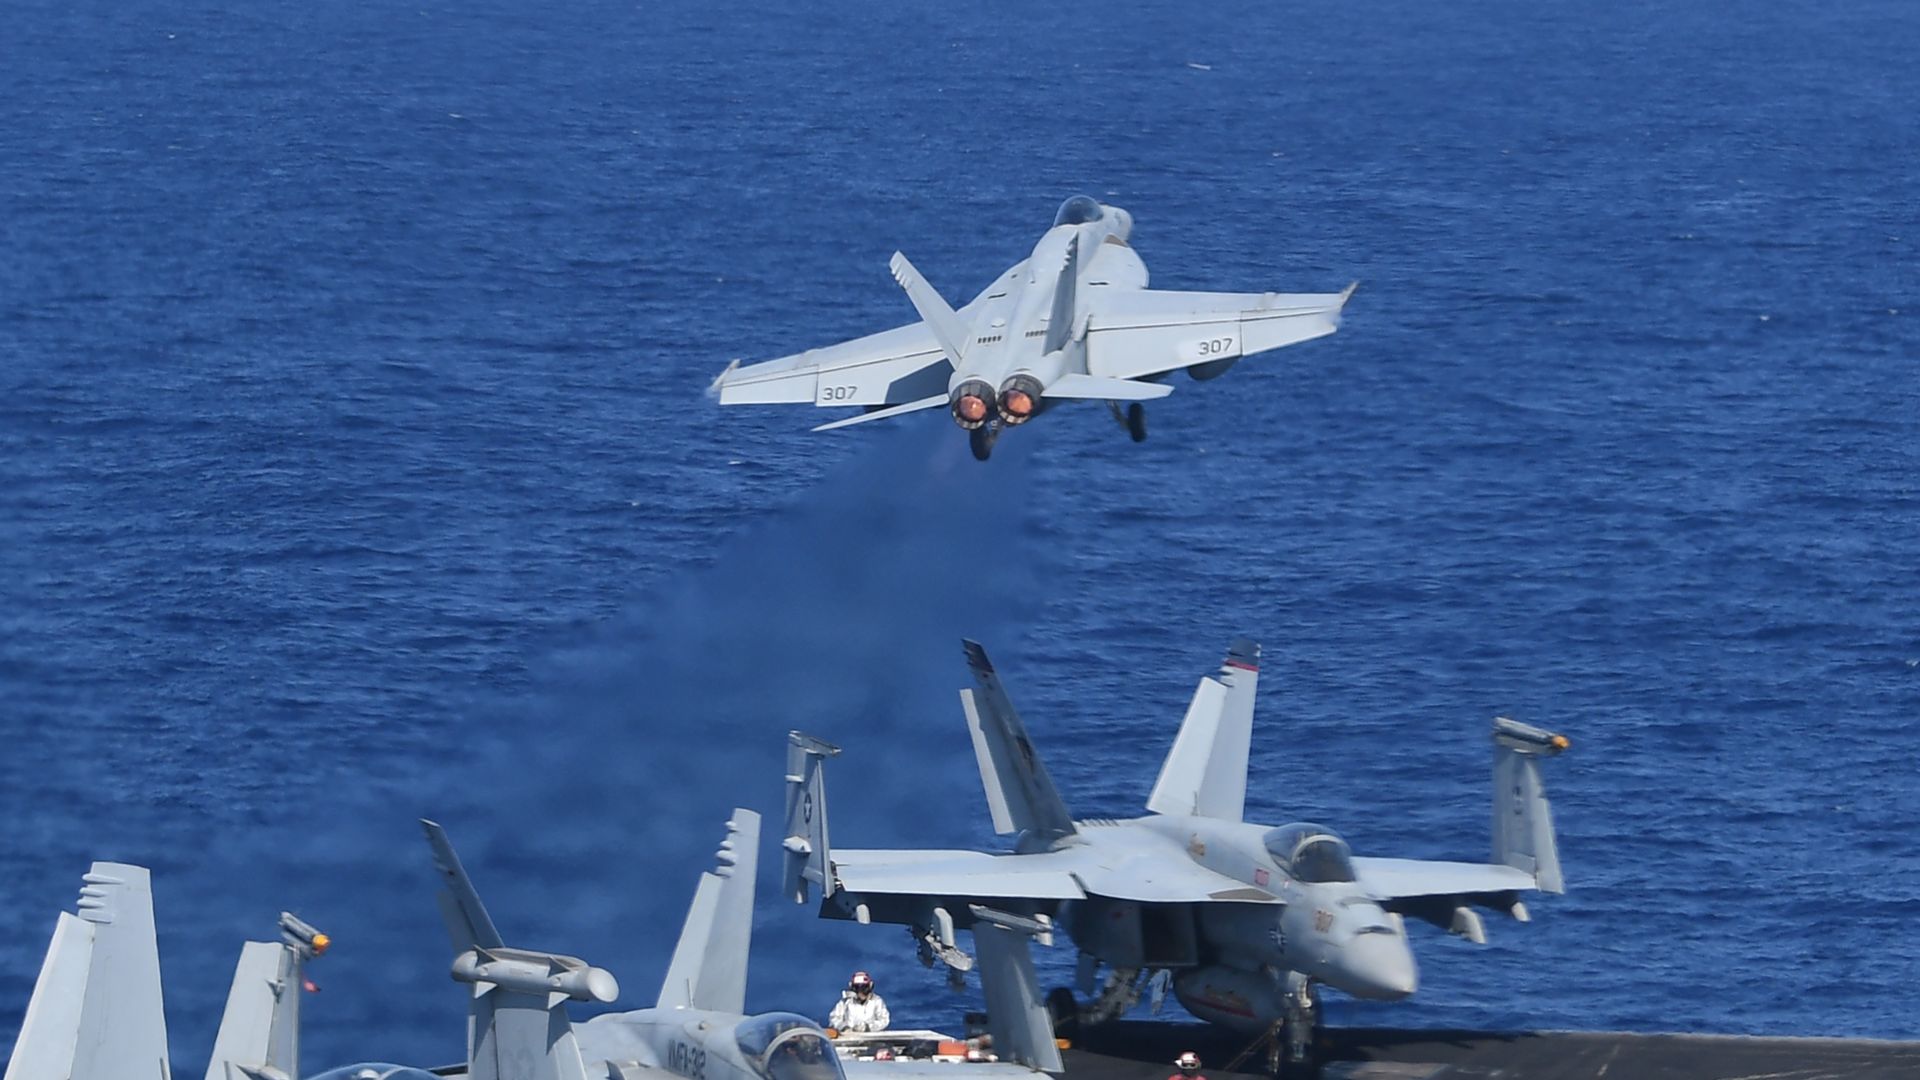 F18 fighter jet takes off from aircraft carrier